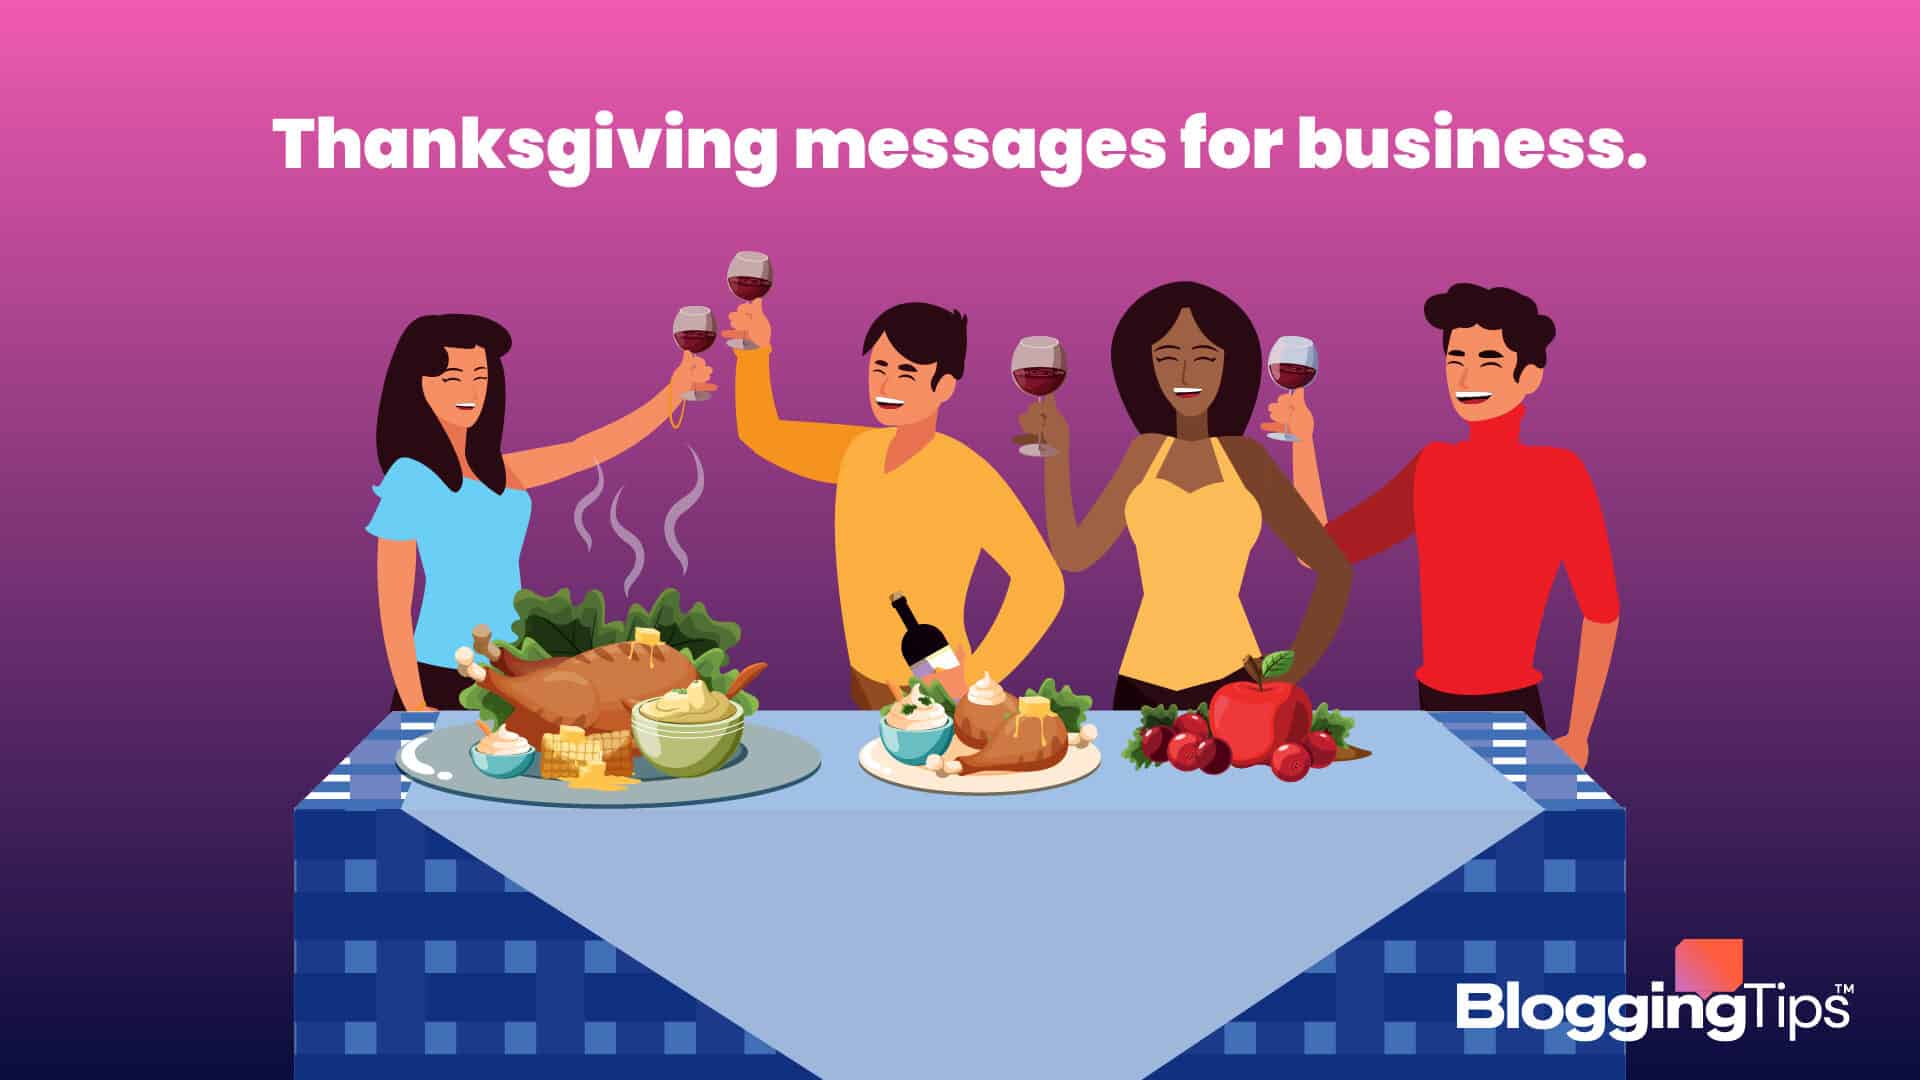 vector graphic showing an illustration of people giving a thanksgiving business message